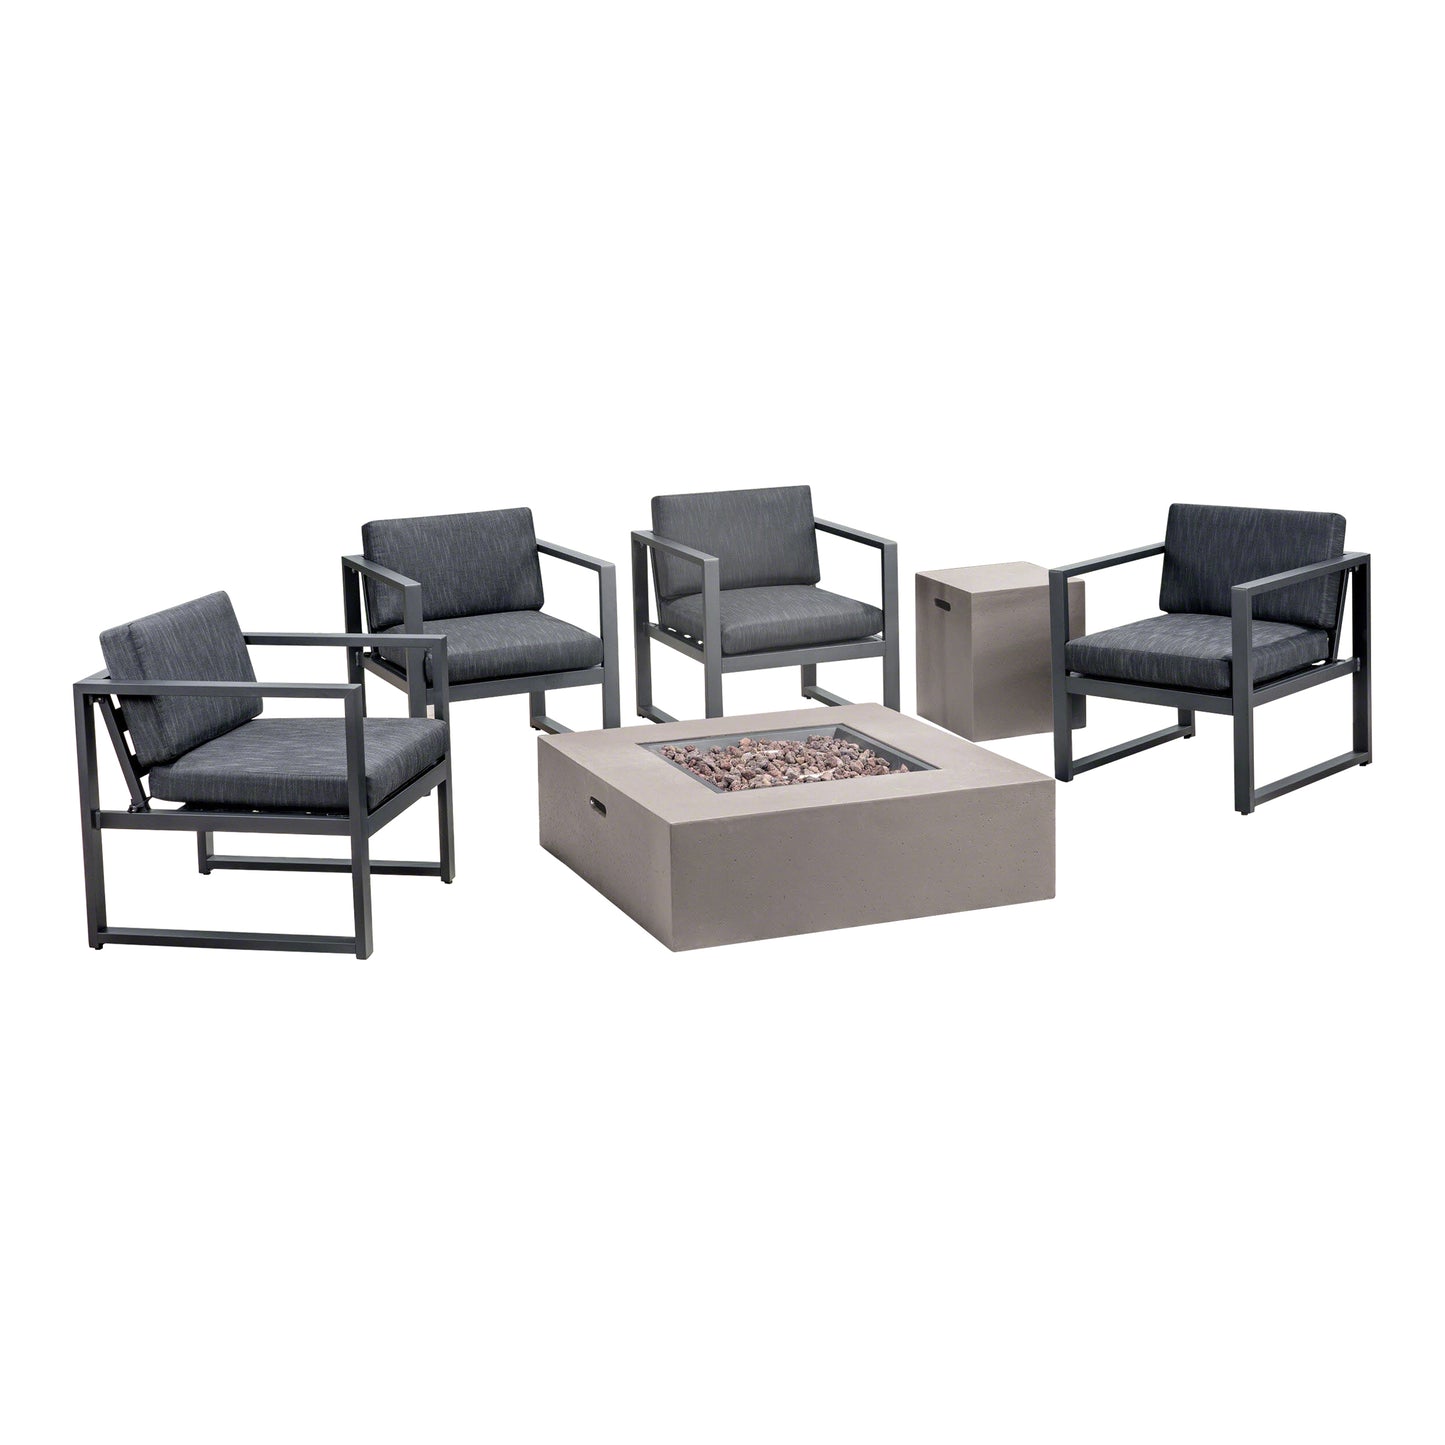 Nealie Outdoor 4-Seater Aluminum Chat Set with Fire Pit